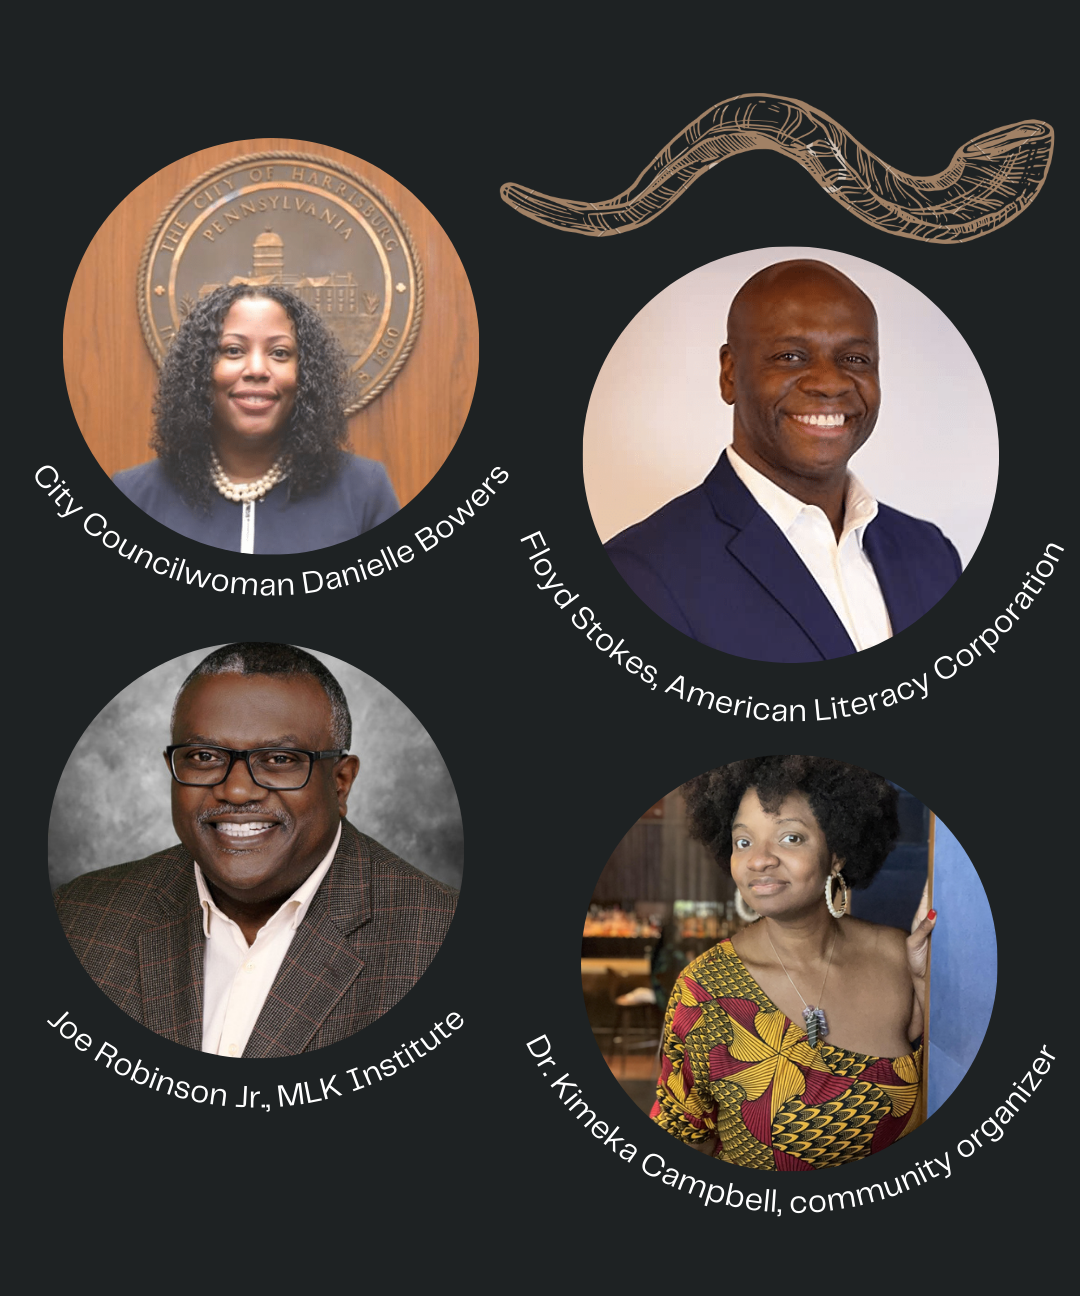 Rosh Hashanah Day 2: Panel with Black Leaders